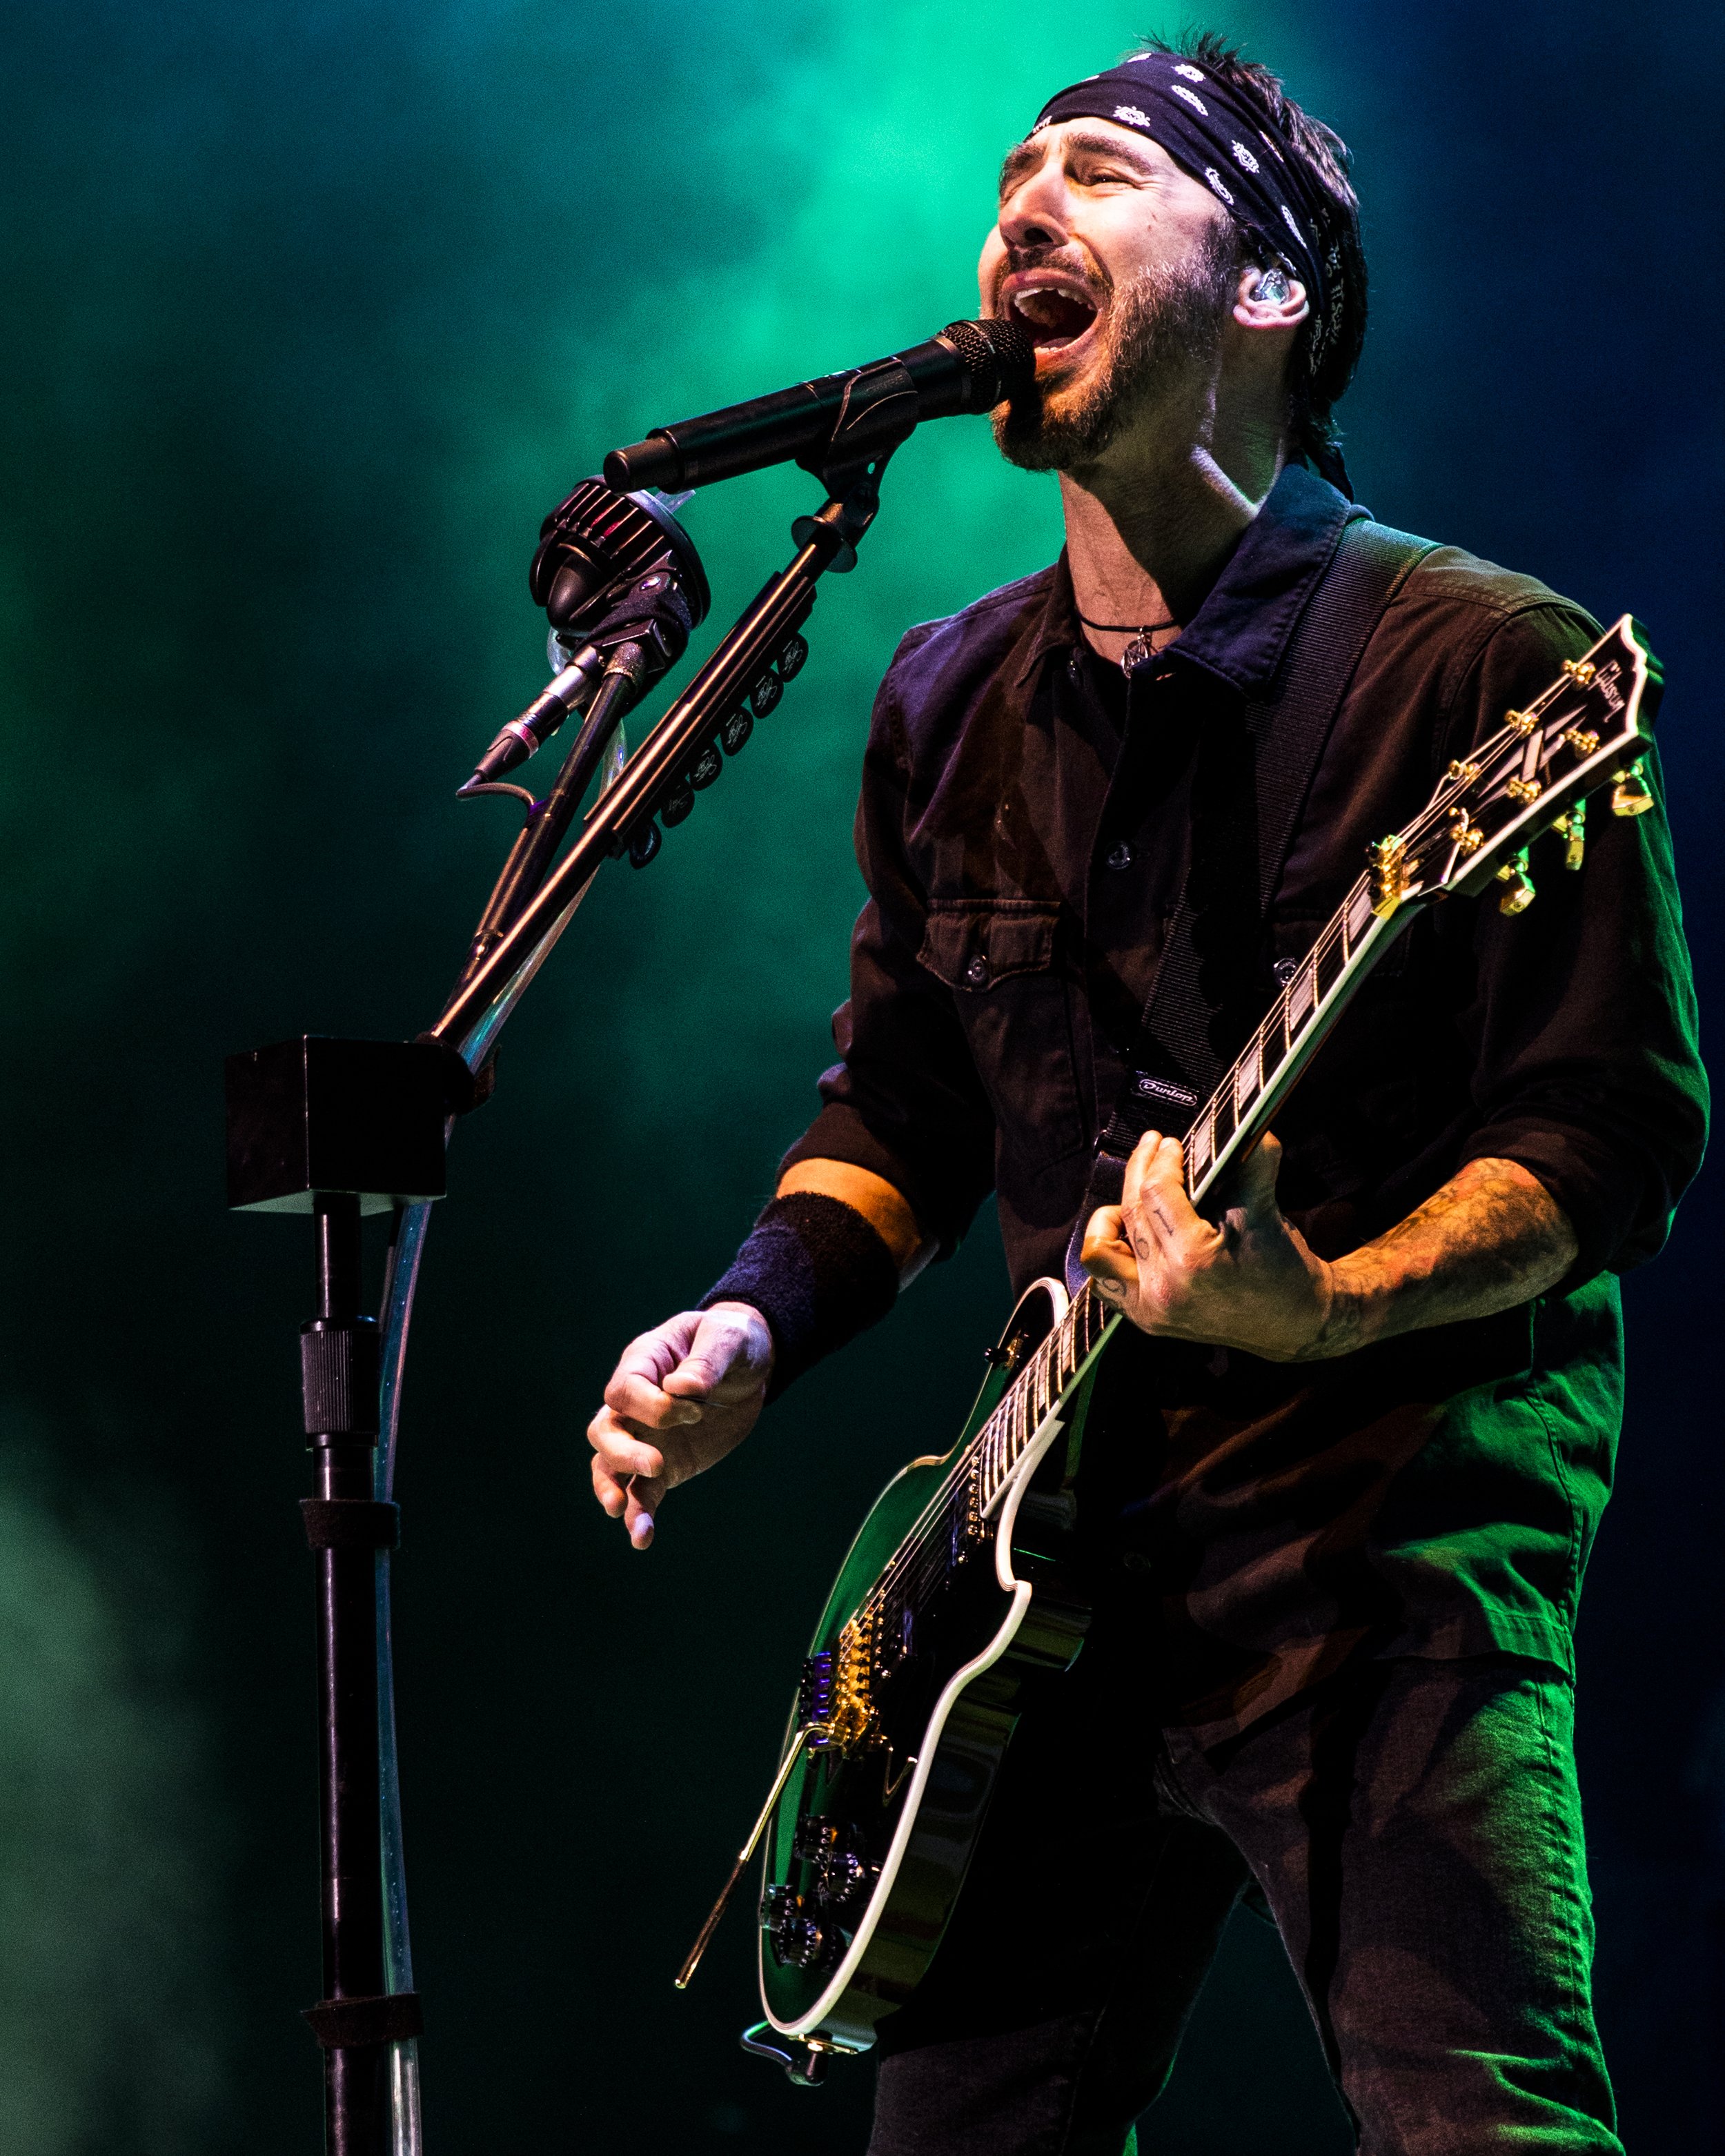 Godsmack, I Prevail, Bad Omens, Fame On Fire - 107.9 KBPI BIRTHDAY BASH - Fiddler's Green Amphitheatre - Greenwood Village, Colorado - Thursday, May 4, 2023- PHOTO BY Mowgli Miles of Interracial Friends-104.JPG